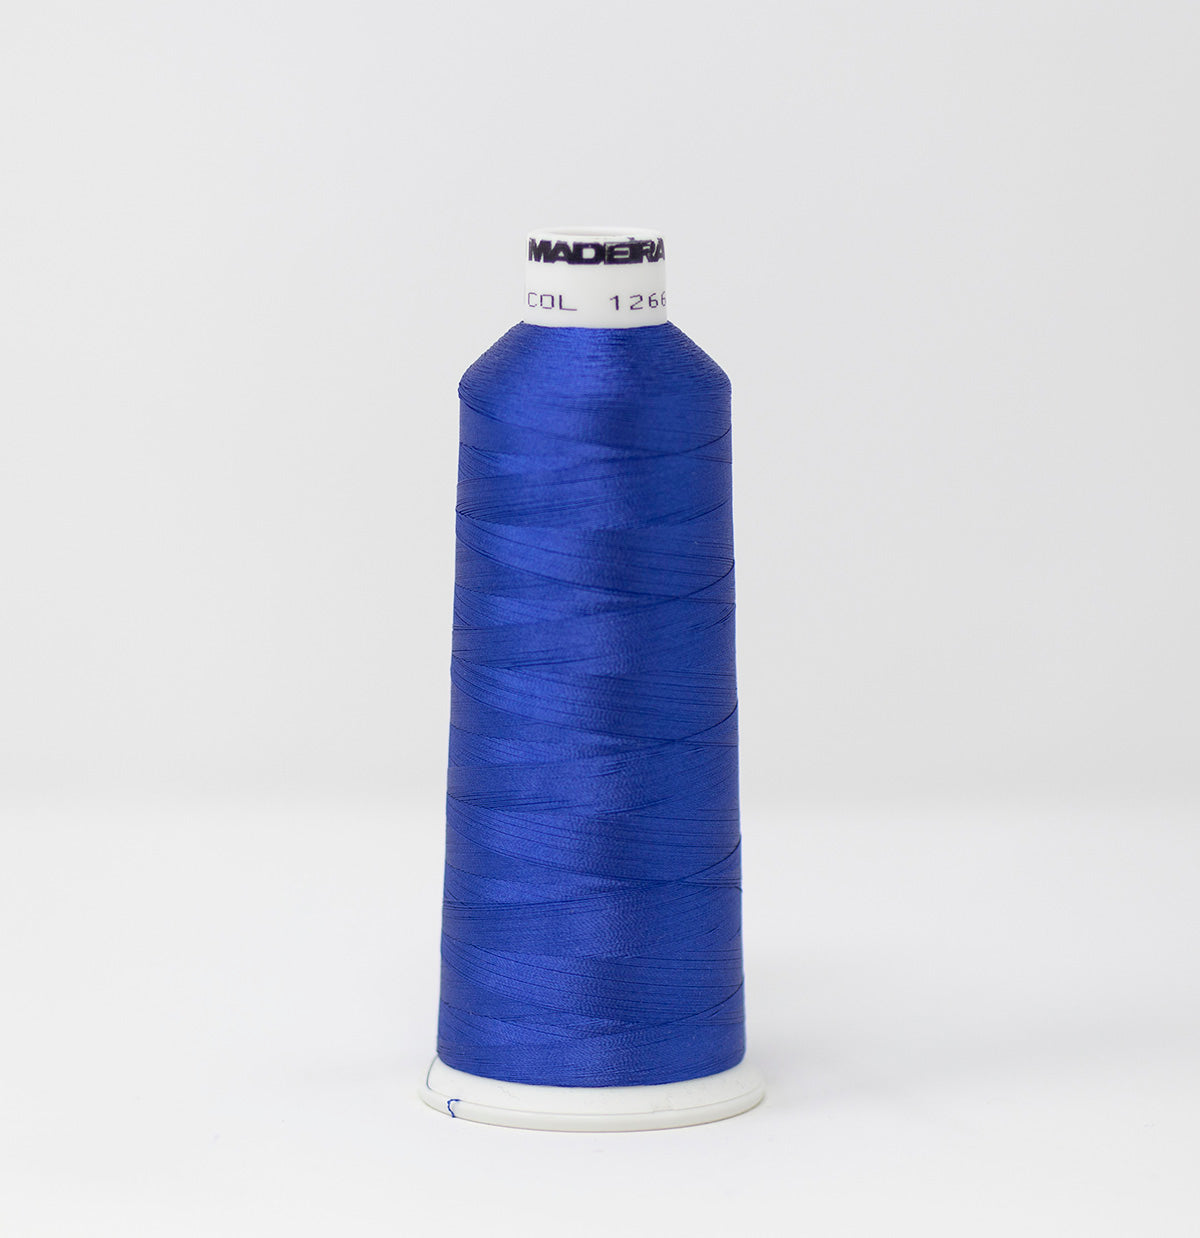 #910-1266 5,500 yard cone of #40 weight Regal Blue Rayon machine embroidery thread.